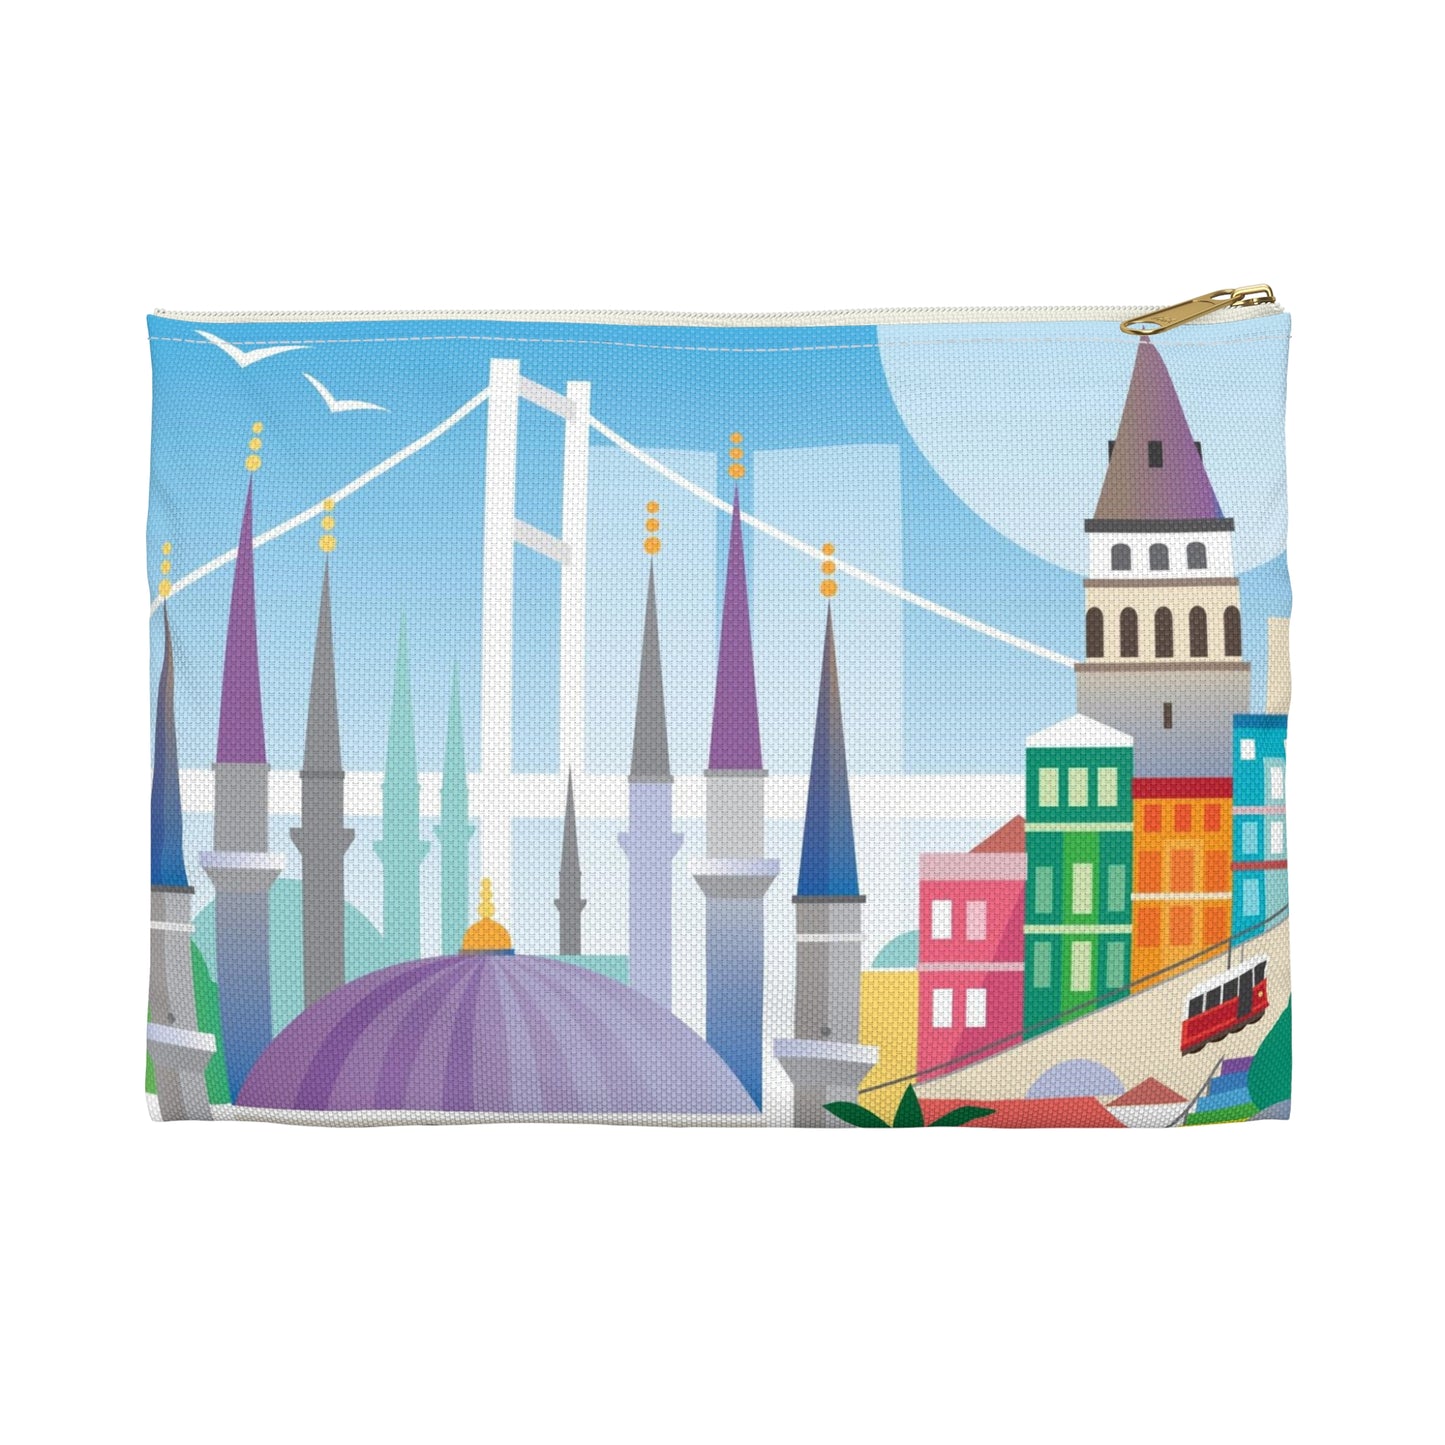 Istanbul Zip Pouch